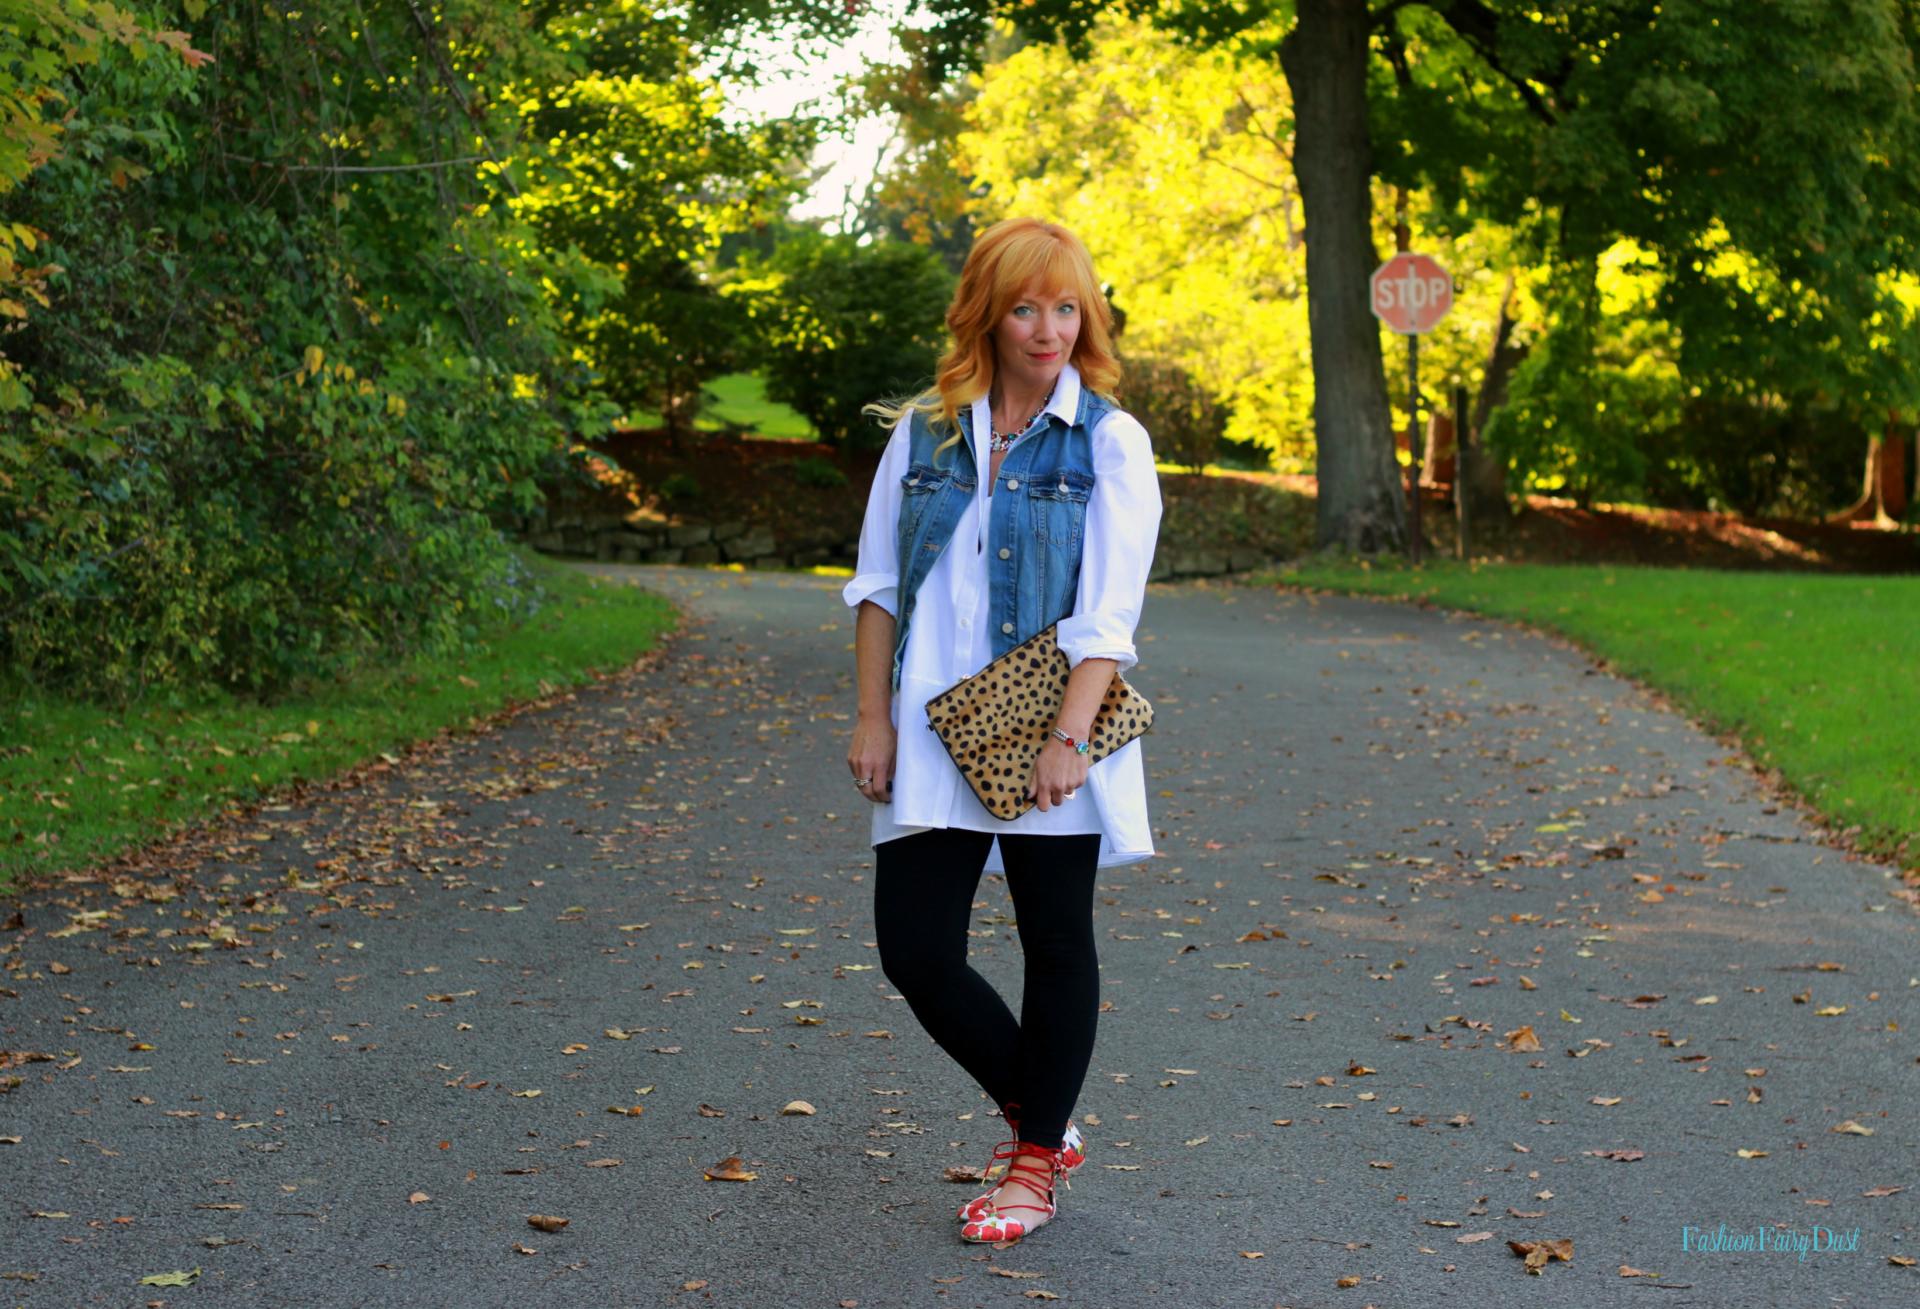 White tunic, floral lace up flats and leggings. Building an outfit around a single piece.